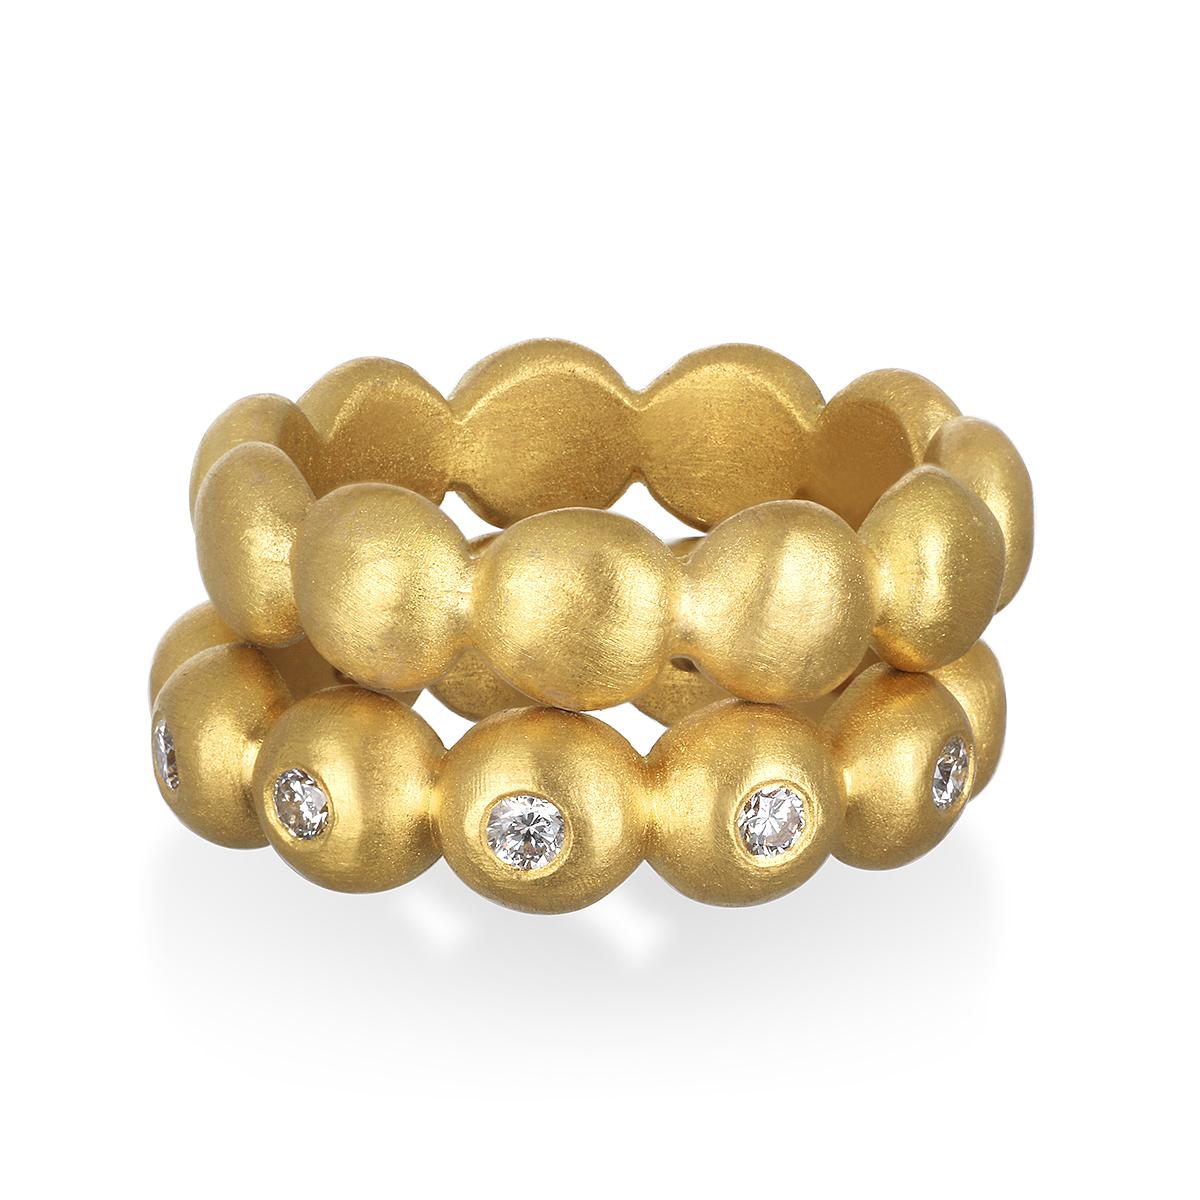 The beauty and luxury of precious gold can be appreciated in Faye Kim's solid 22 Karat Gold Granulation Bead Band Ring. The perfect addition to any stack ring collection or wear it alone; also ideal as a wedding band. 

Size 7.5, can be